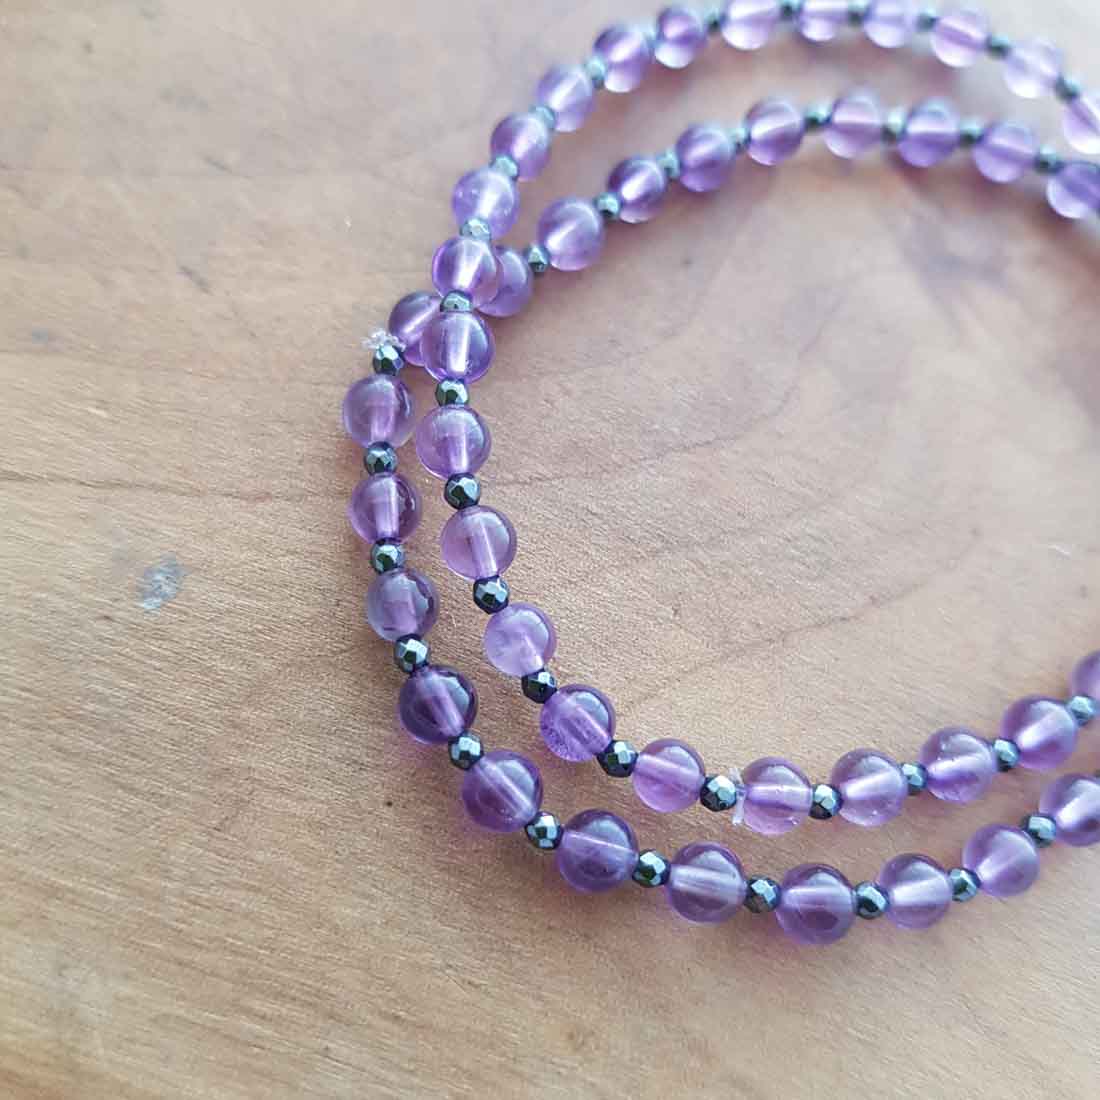 Amethyst & Sparkly Bead Bracelet (assorted. approx. 4mm round beads wi ...